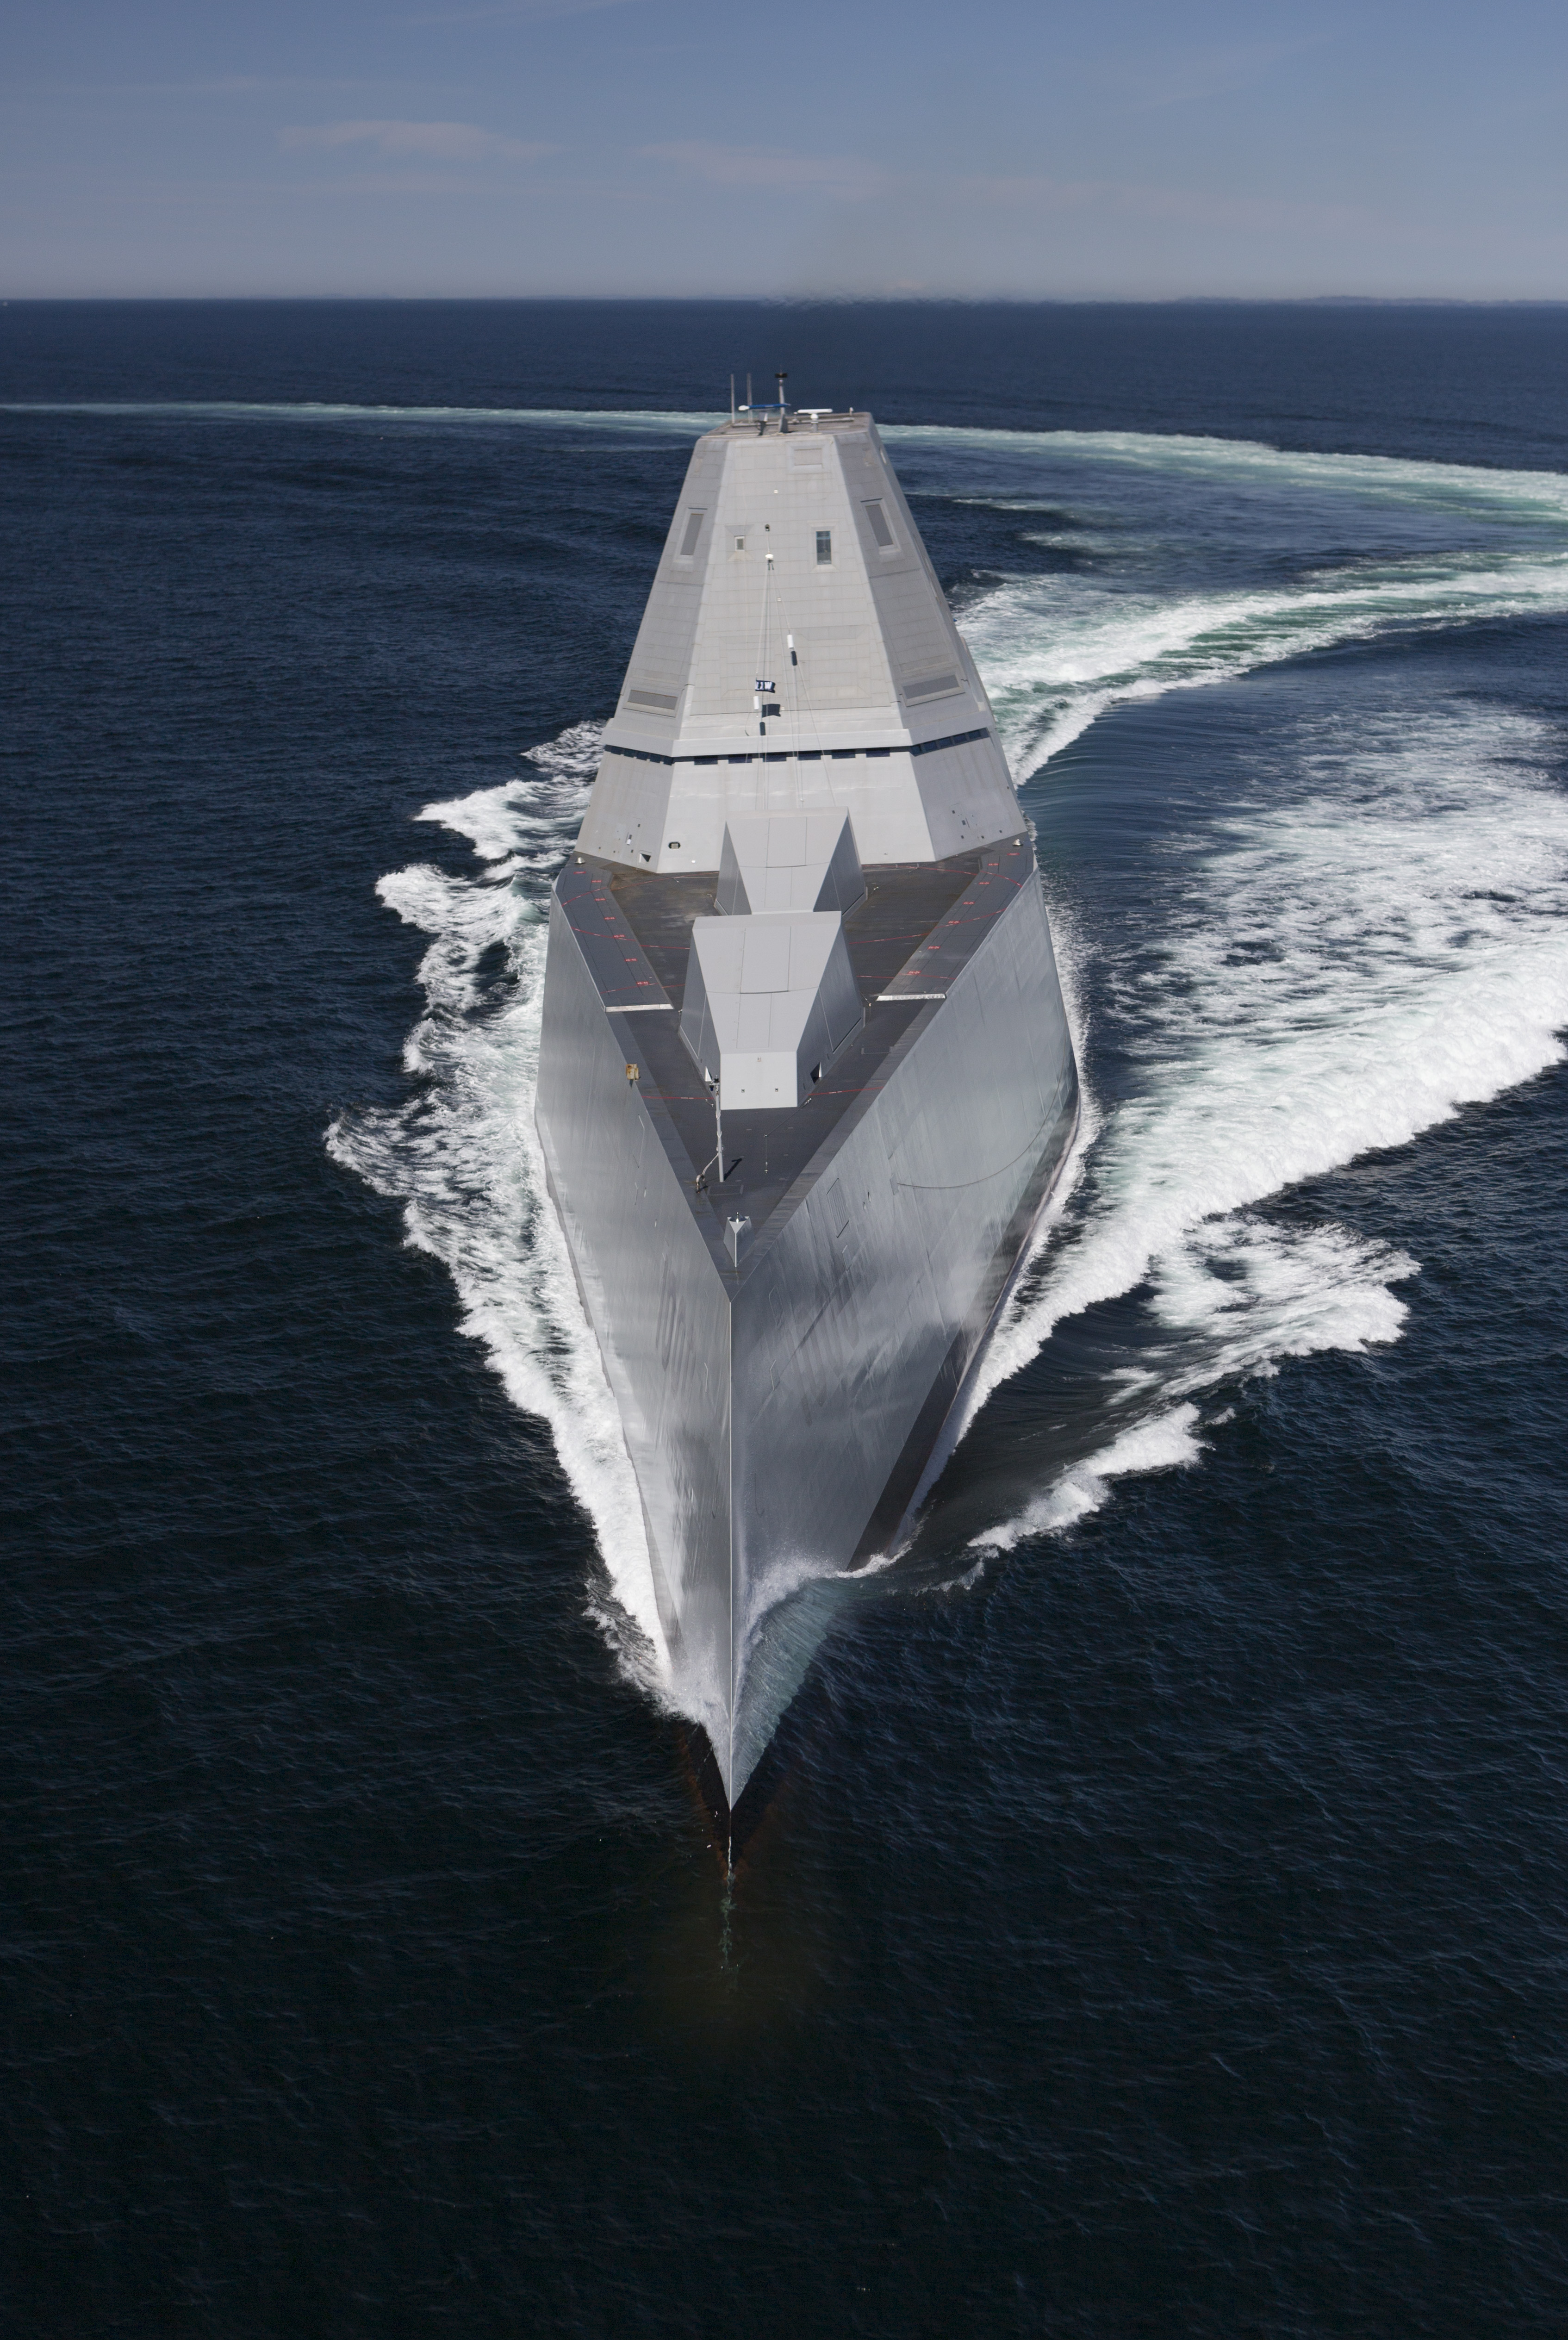 Destroyer Zumwalt (DDG-1000) transits the Atlantic Ocean during acceptance trials with the Navy's Board of Inspection and Survey (INSURV). US Navy Photo